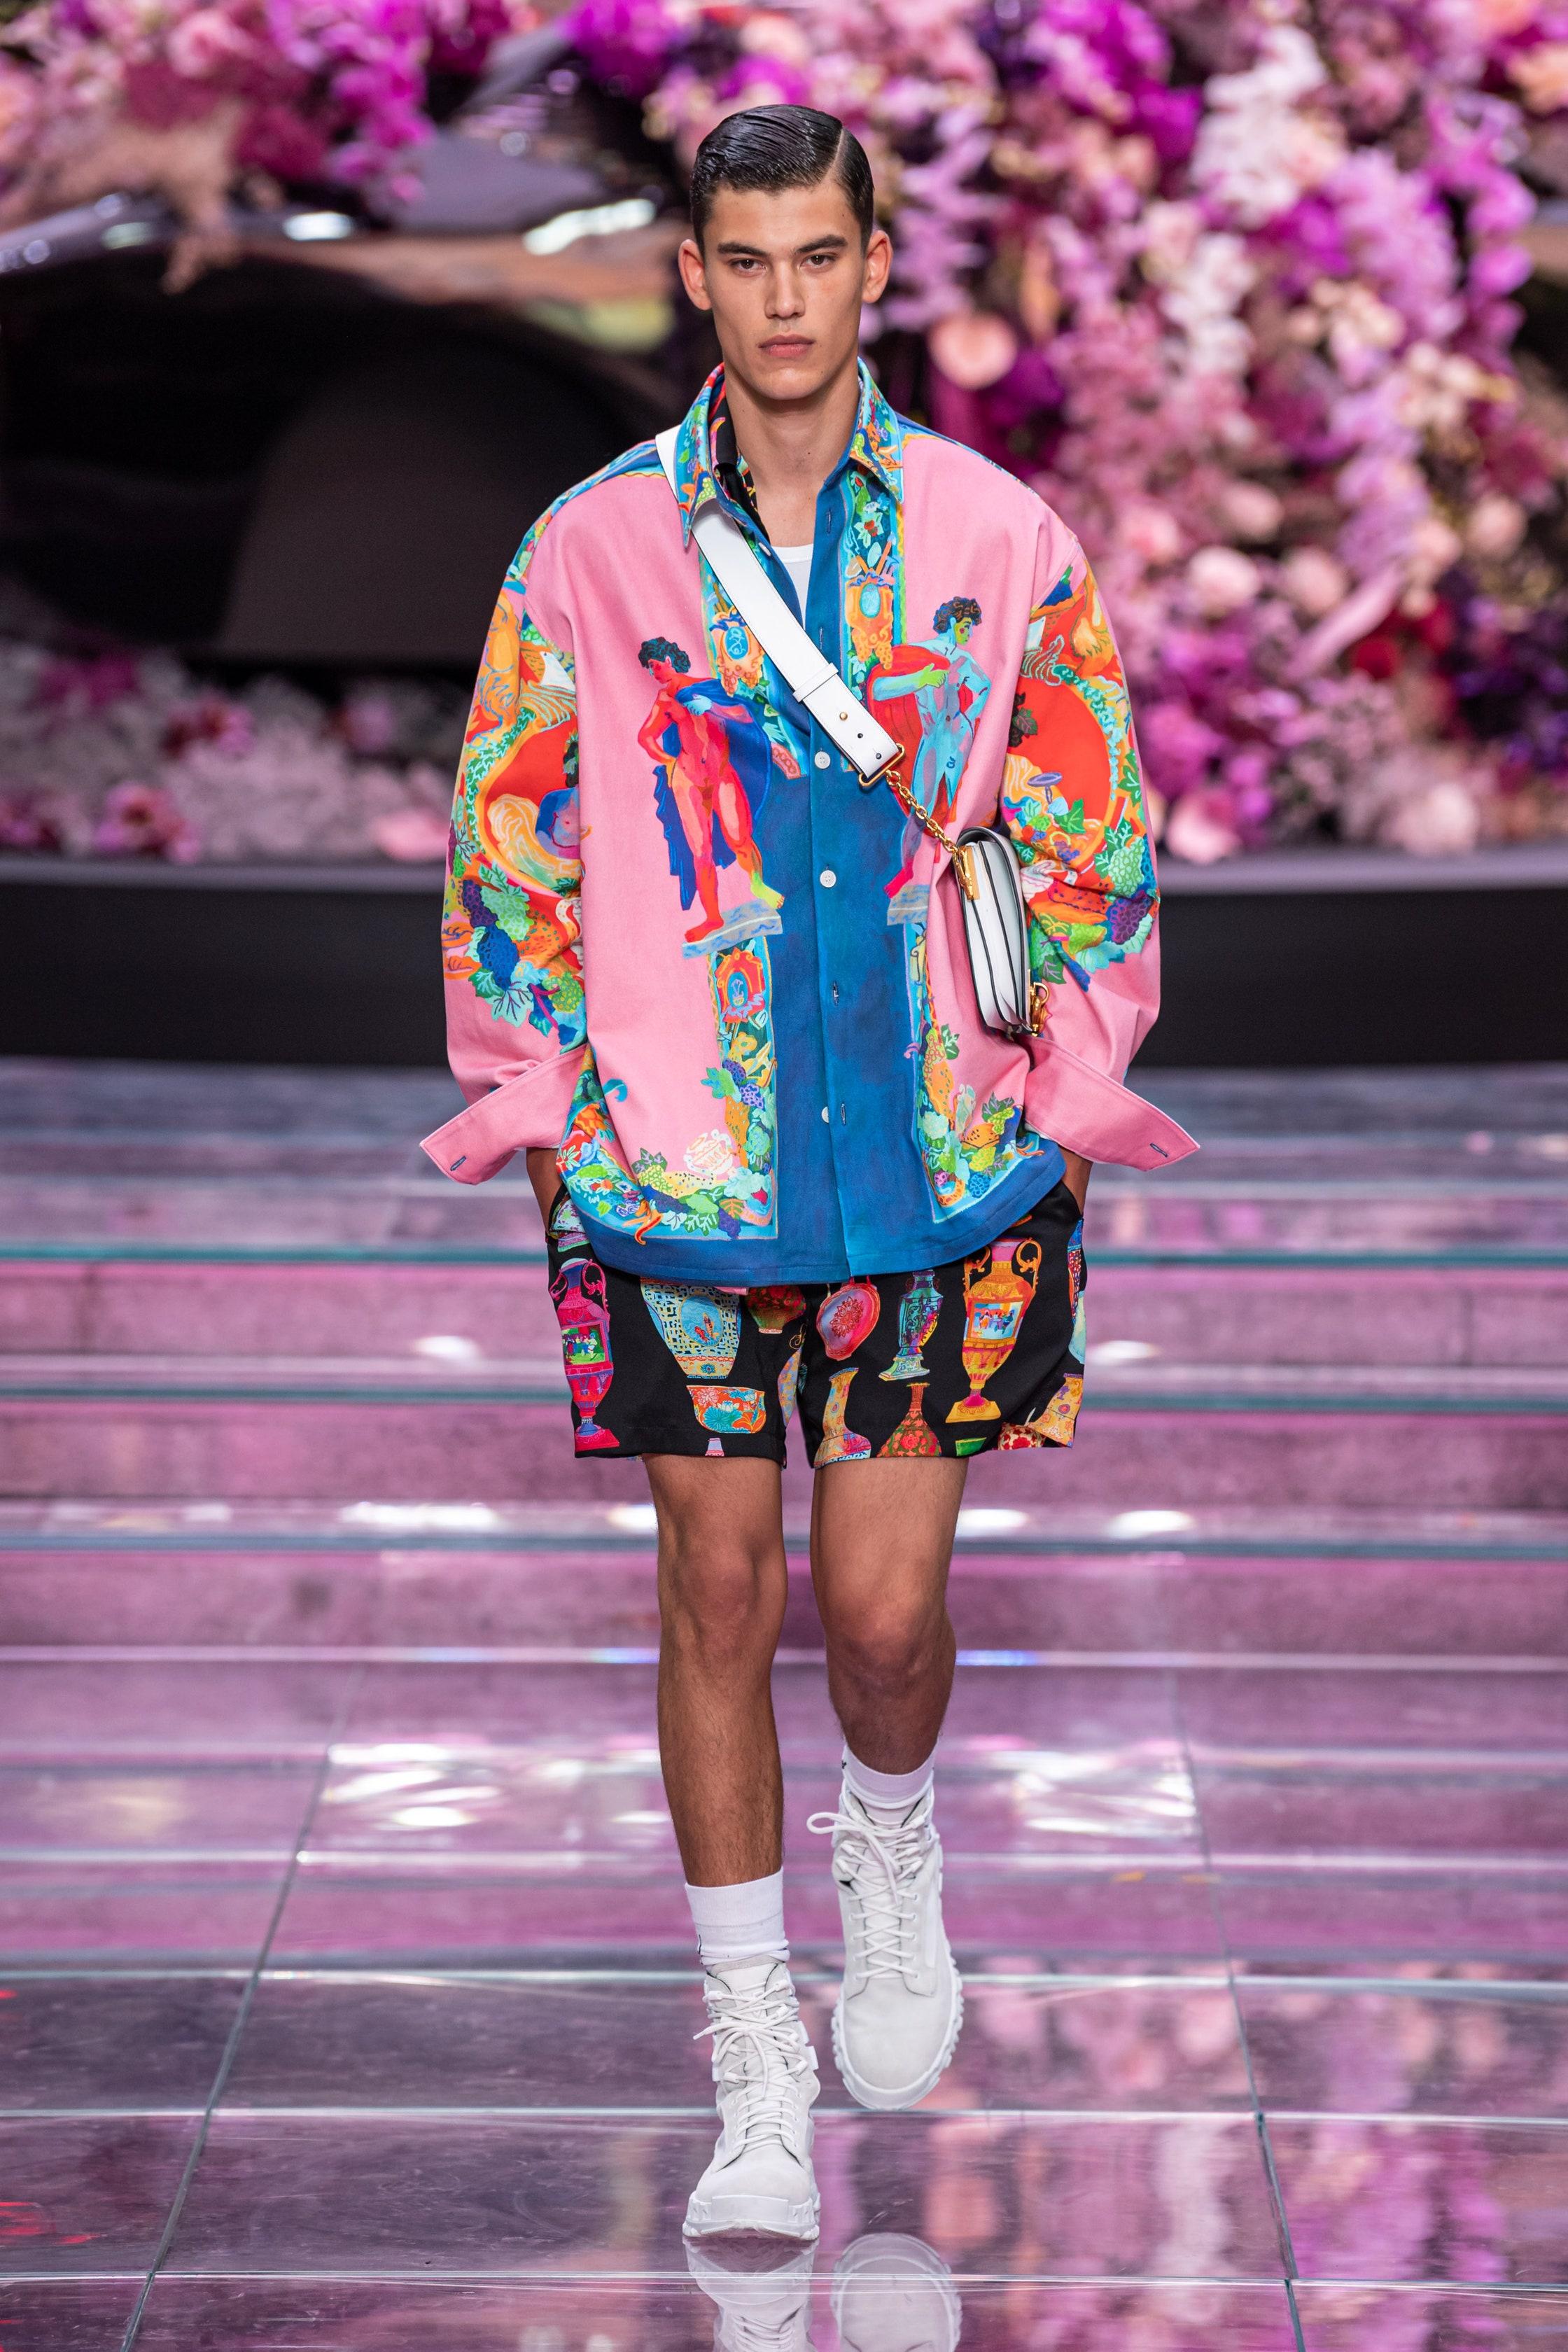 new VERSACE 2020 Runway Andy Dixon Caravaggio Archive pink silk shirt EU39 M
Reference: TGAS/C00007
Brand: Versace
Designer: Donatella Versace
Collection: Spring Summer 2020 Runway
Material: Silk
Color: Pink
Pattern: Caraggio
Closure: Button
Extra